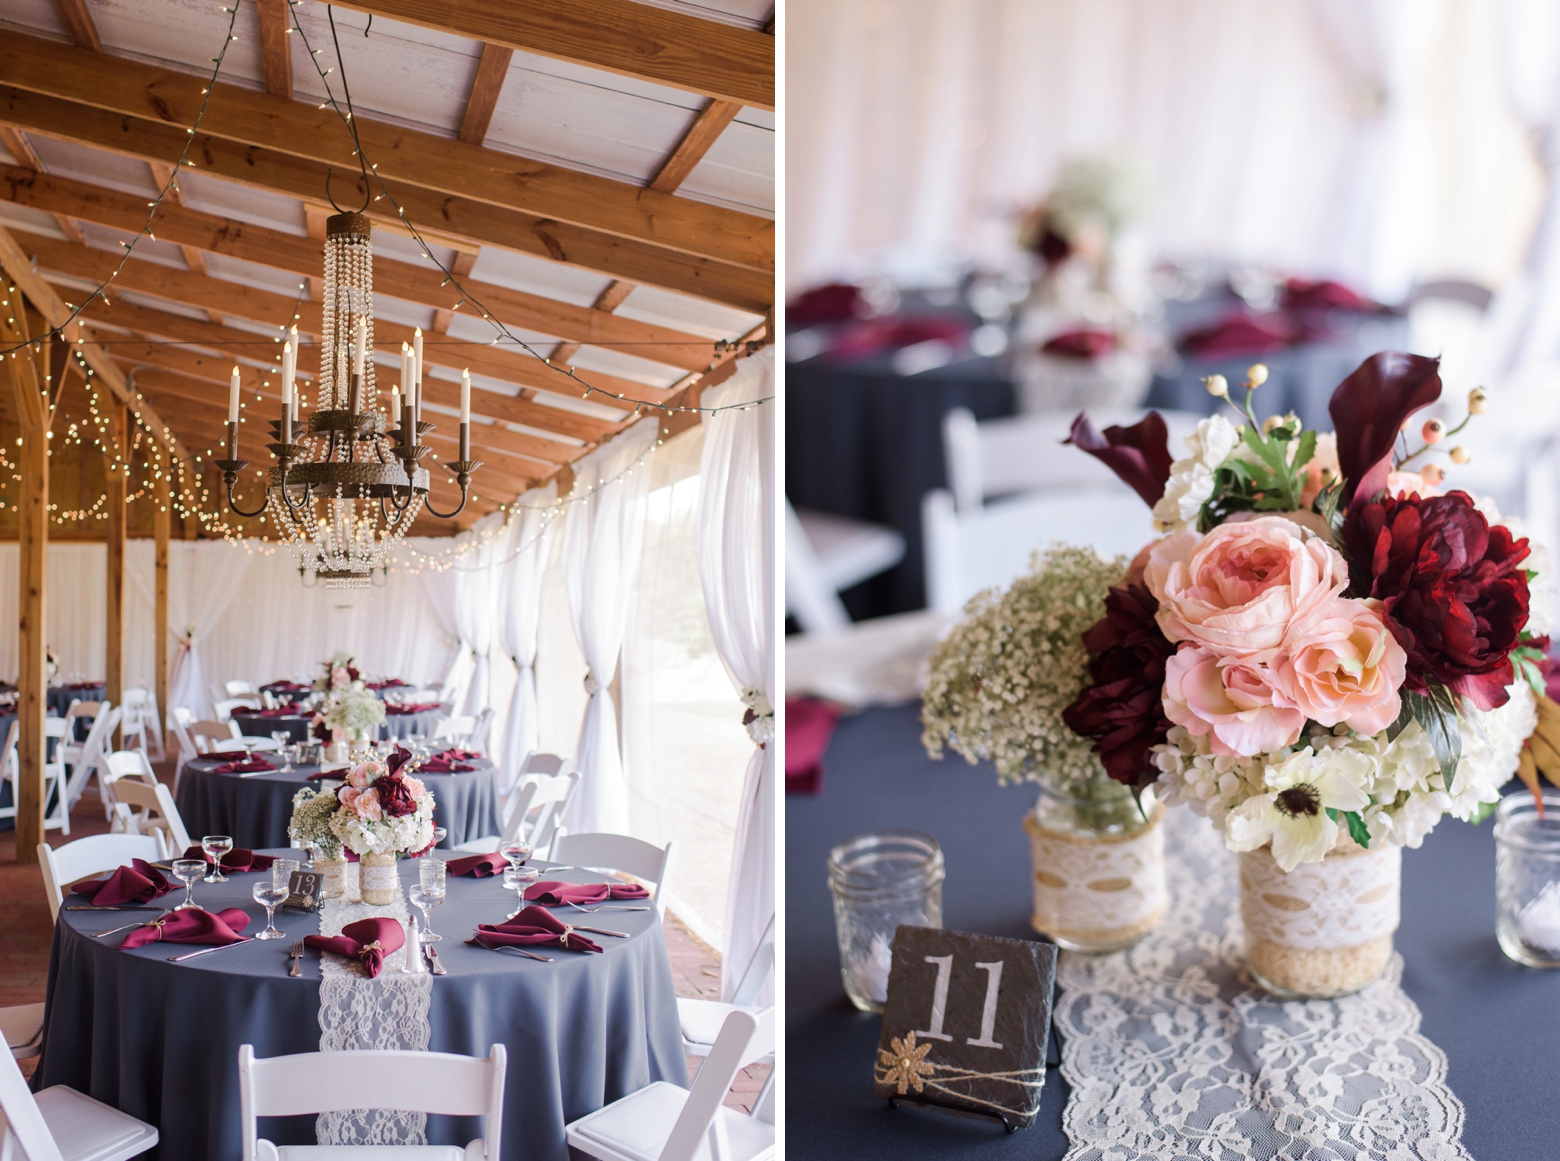 The reception space at Cross Creek Ranch always stuns with the light and attention to details